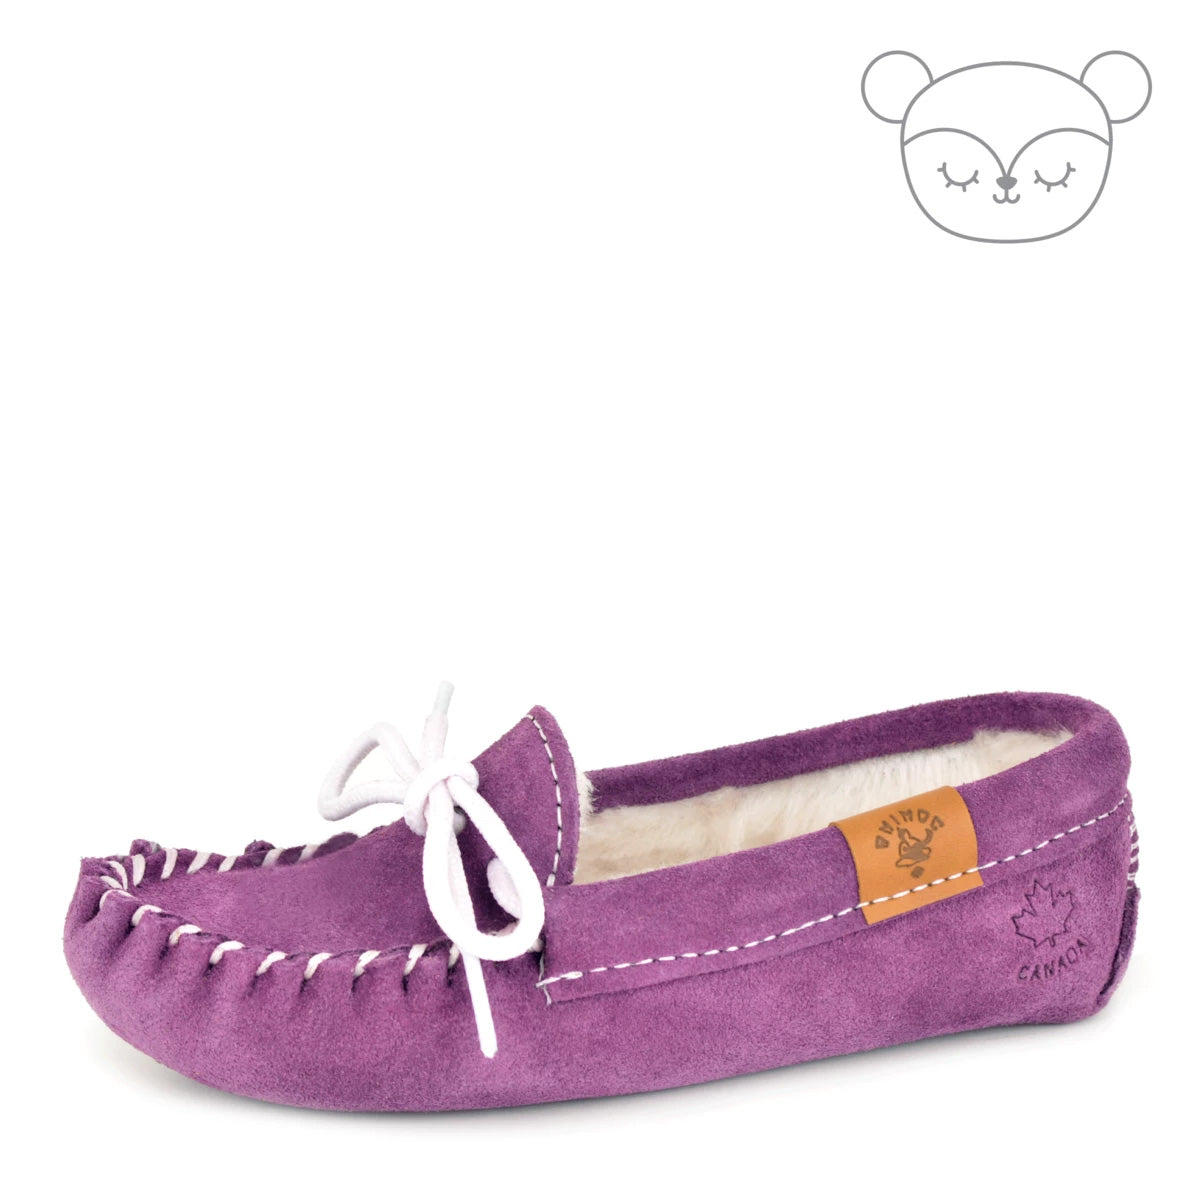 Lonan moccasin for kid - Orchid